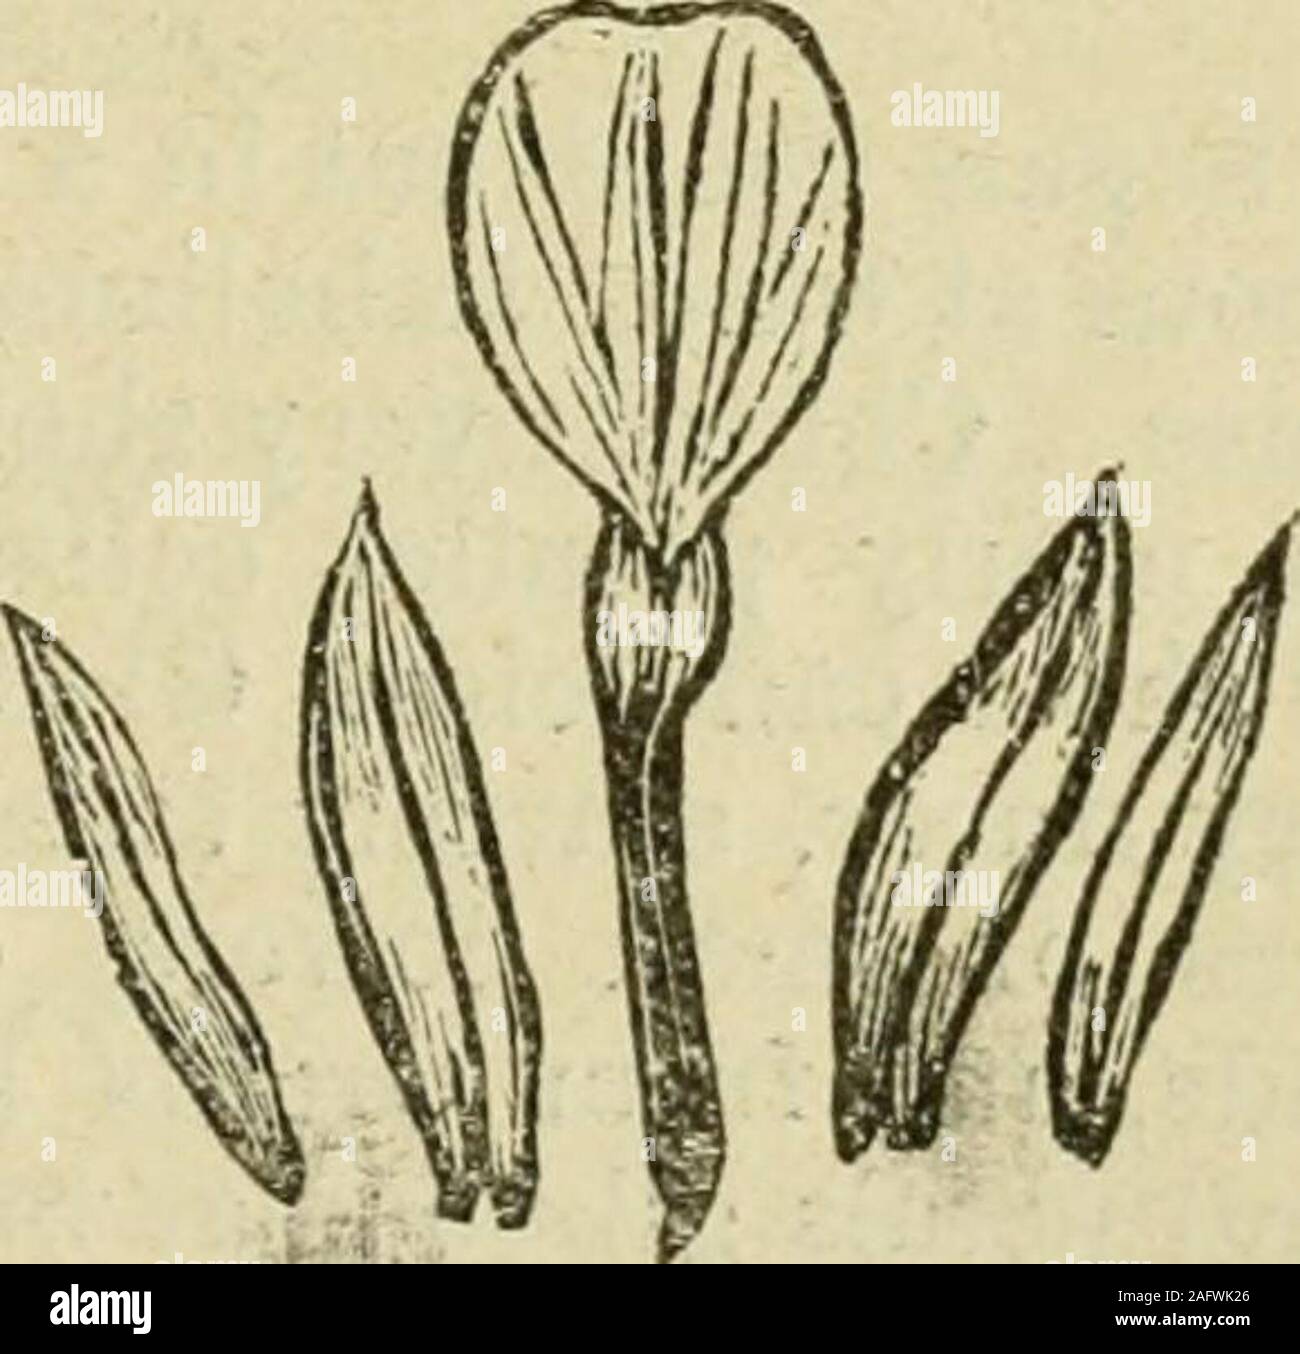 . Flora of Syria, Palestine, and Sinai : from the Taurus to Ras Muhammas and from the Mediterranean sea to the Syrian desert. Touru. Limodorum. Sepals and petals ascending. Labellum constricted at middle,somewhat jointed, the hypochilium parallel to column, connate with itat base, spurred; epichilium undivided Column elongated, triangular.Anther oblong, terminal, movable, 2-celled. Pollinia 2, undividedjat length adherent to the transversely ovate, 2-lobed, stigmatic glands.Ovary not twisted, stipitate — Parasitic, leafless herbs, growing on roots of Pines and Oaks, li. al?ortiviiiii, L. 2X .5 Stock Photo